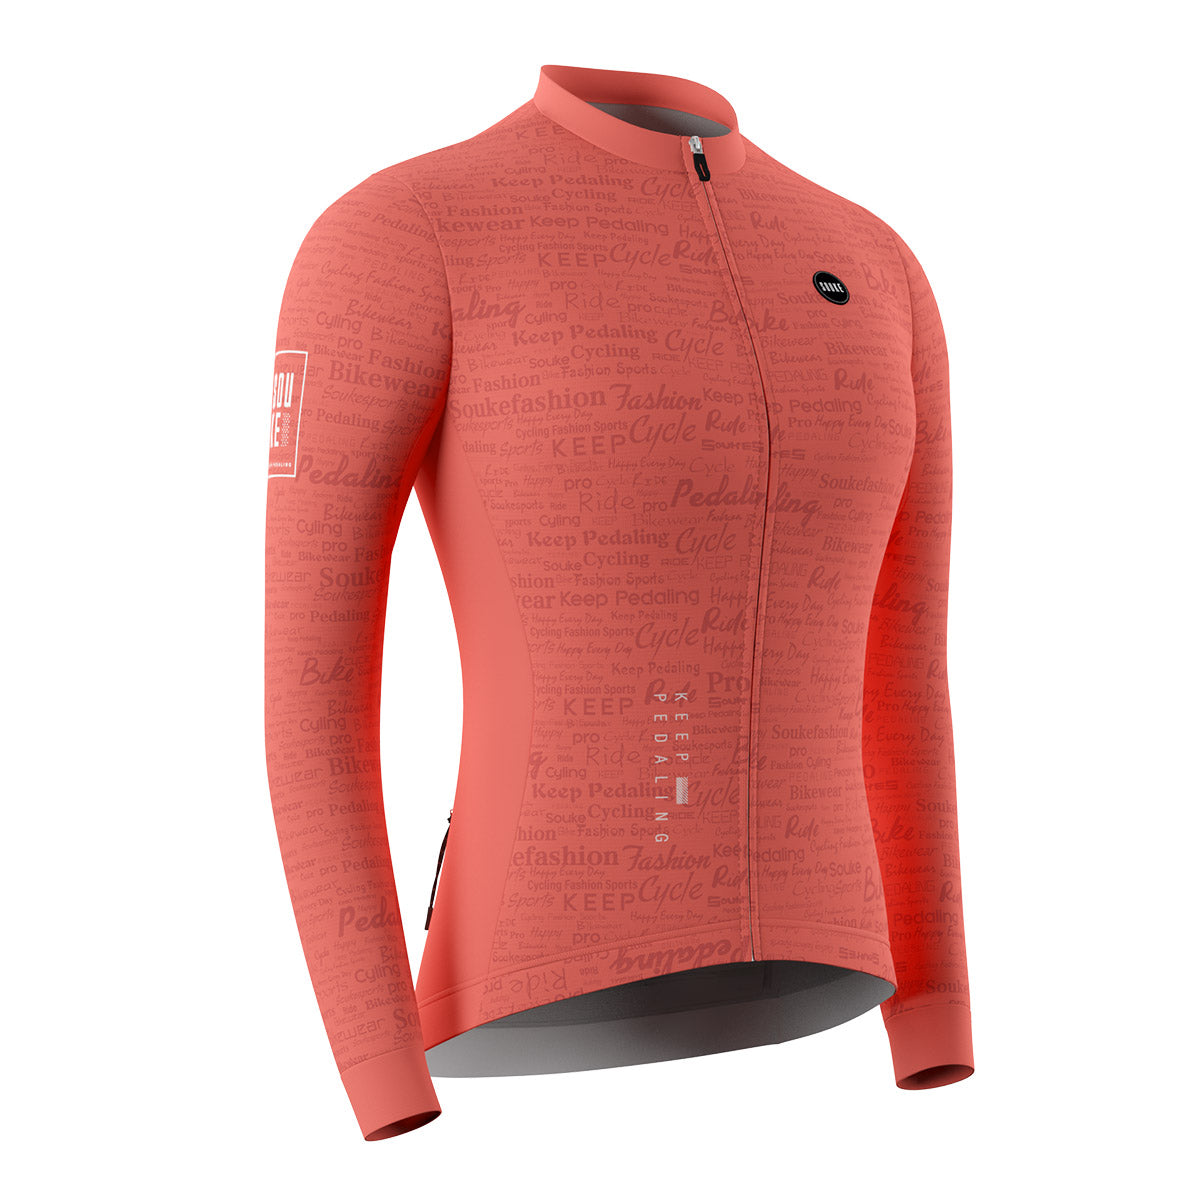 cycling long sleeve jersey, Graphene jersey,jersey for winter,Pink Grapefruit long jersey,jersey for winter and autumn, cold weather jersey (6805616197745)